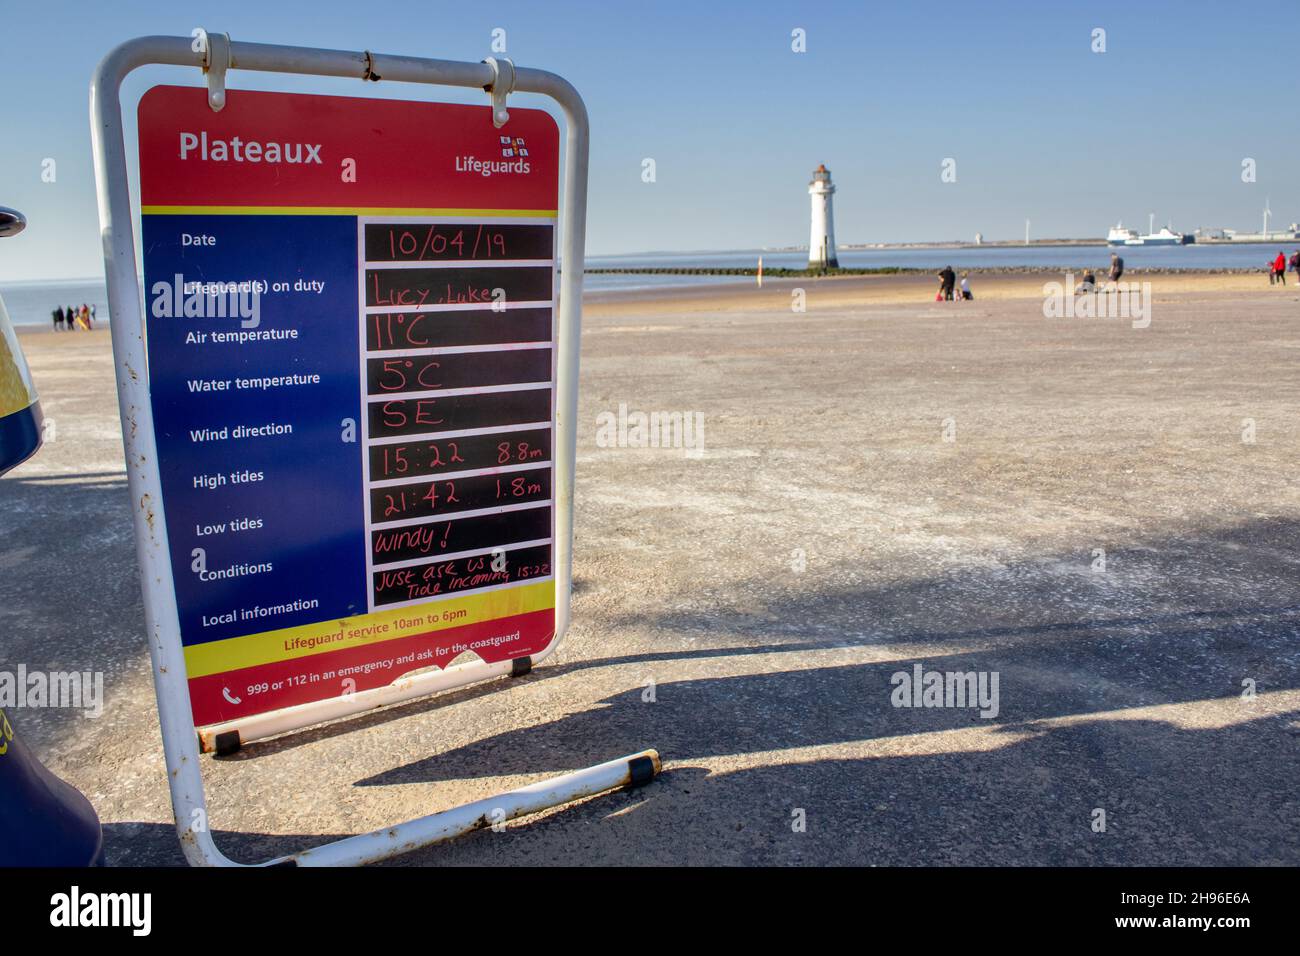 New Brighton, UK: Lifeguard information board, including tide times, next to the beach. Stock Photo